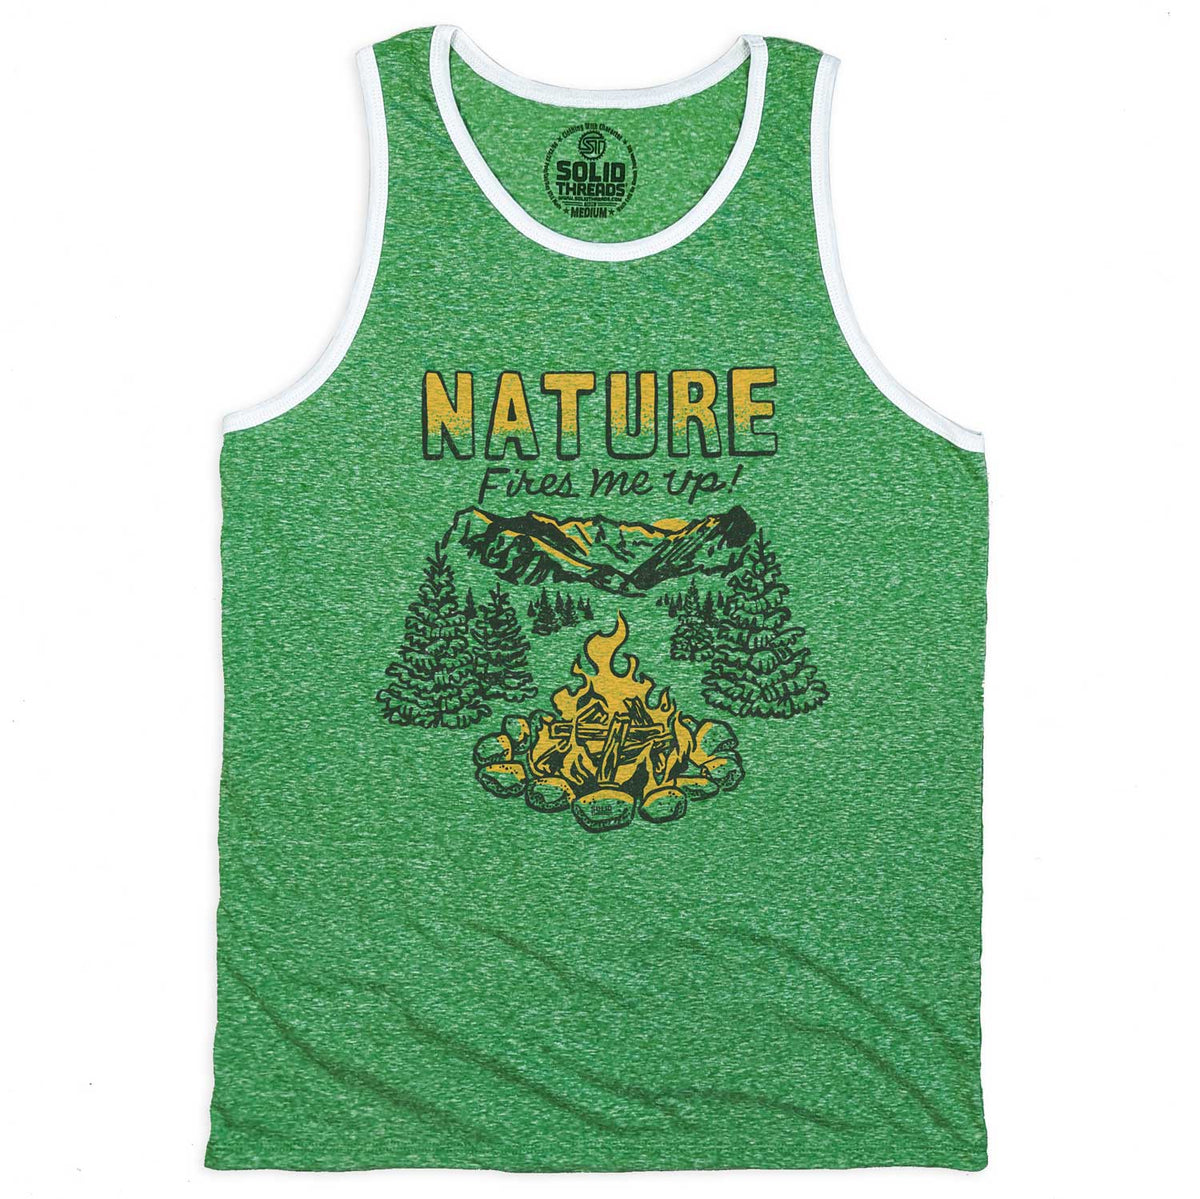 Men&#39;s Nature Fires Me Up Vintage Graphic Tank Top | Retro Camping T-shirt | Solid Threads